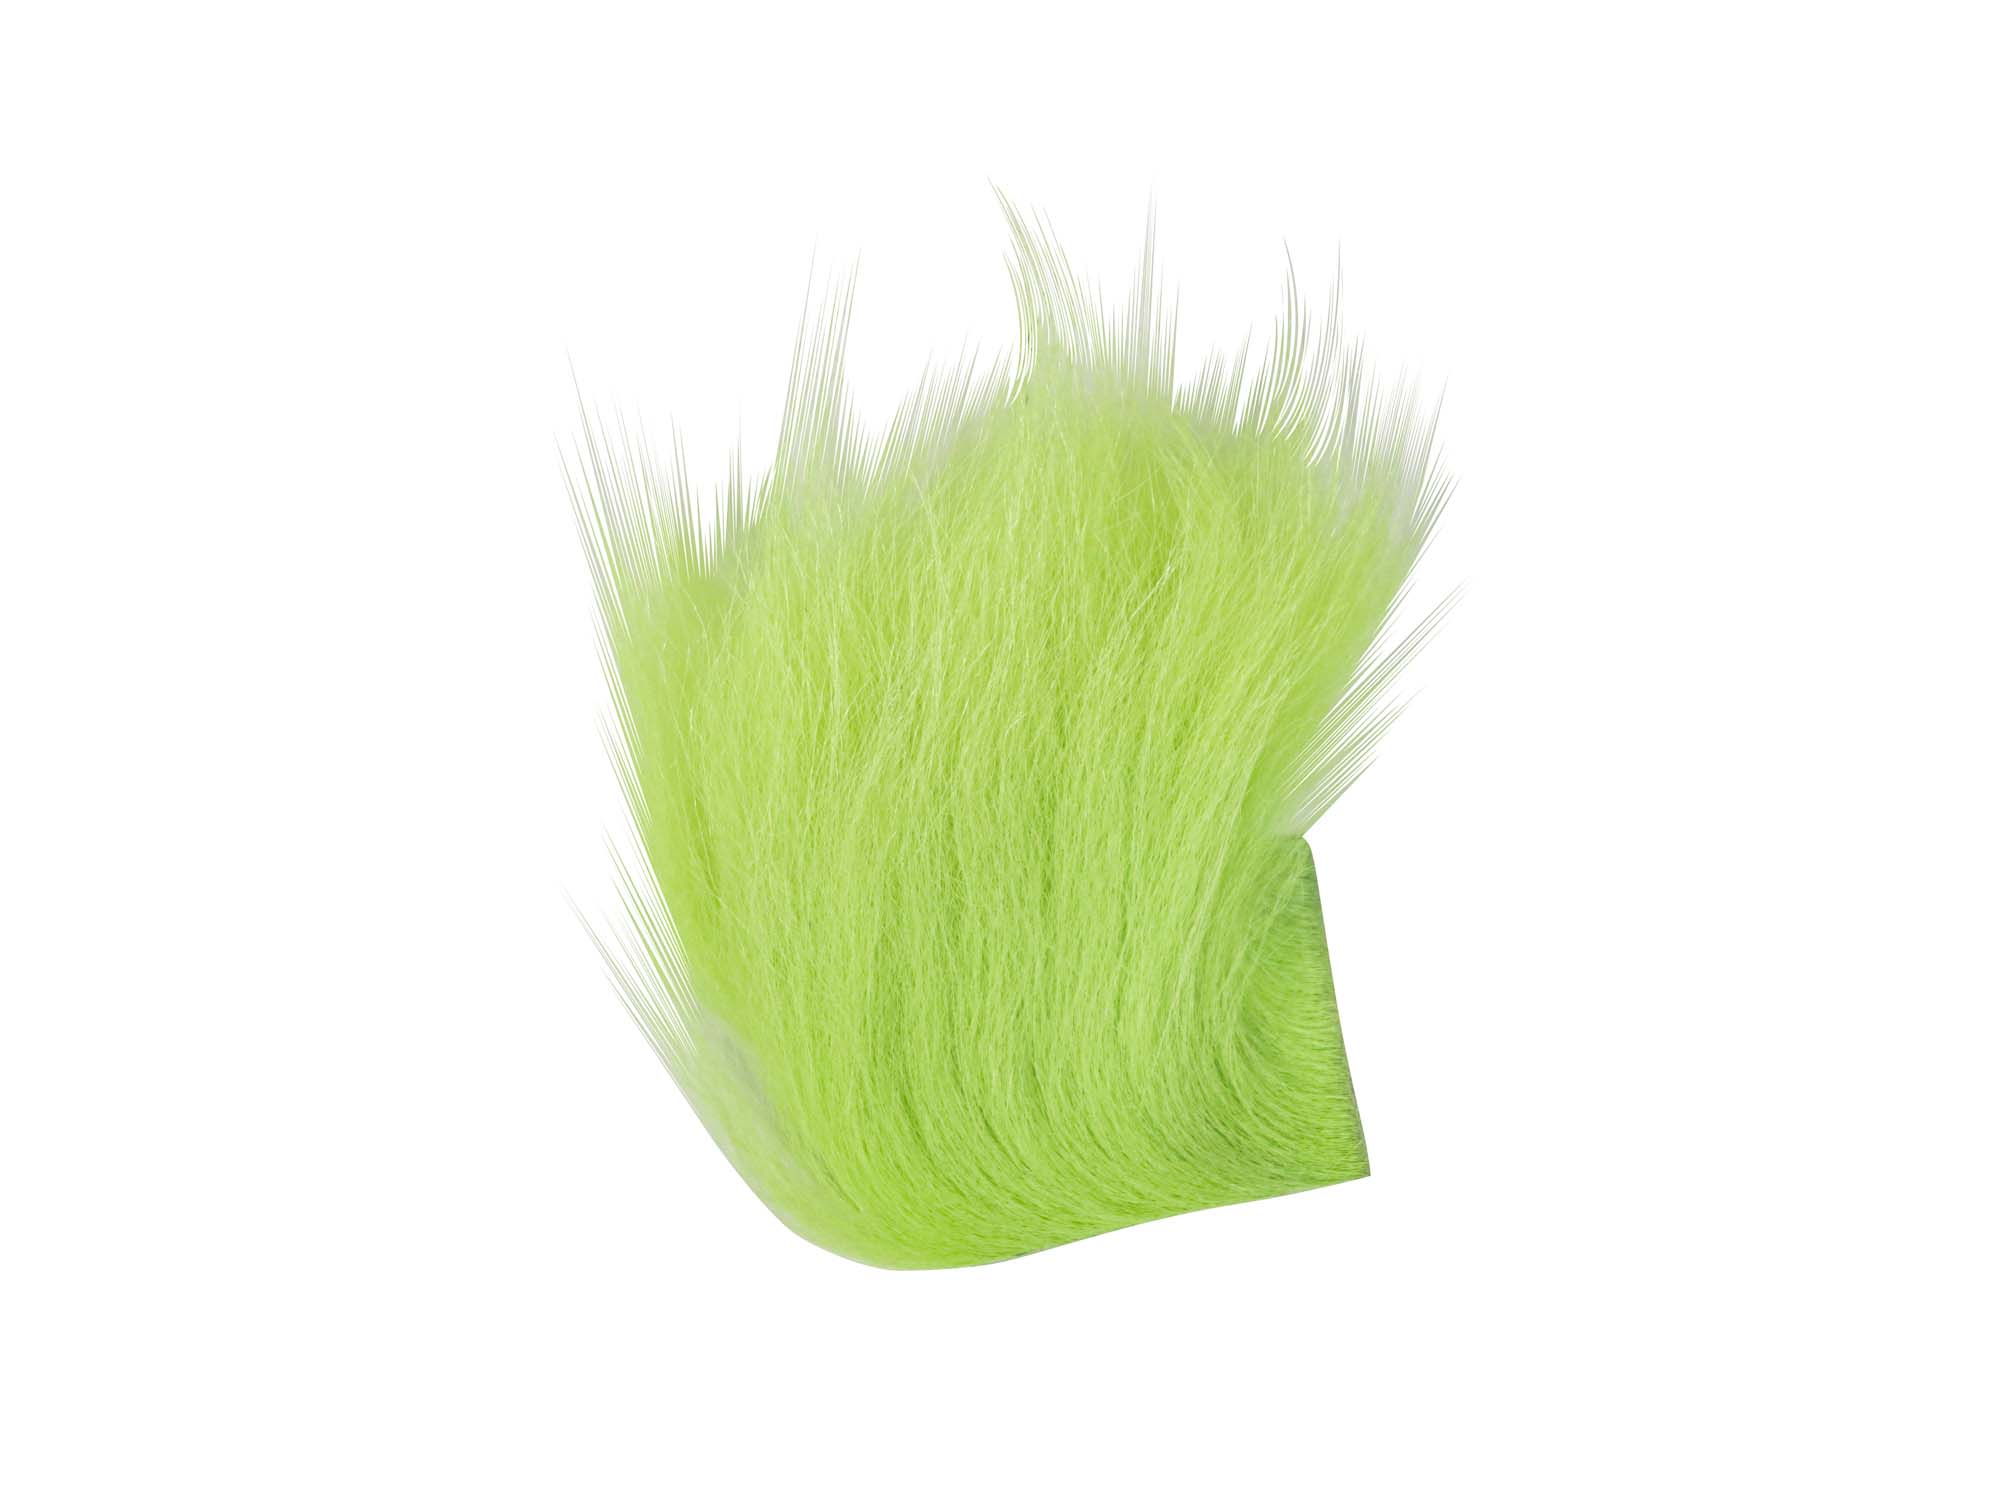 Dyed Arctic Runner Fly Fishing Piece: Lime Green - 1377-LG-AS (9UL4)